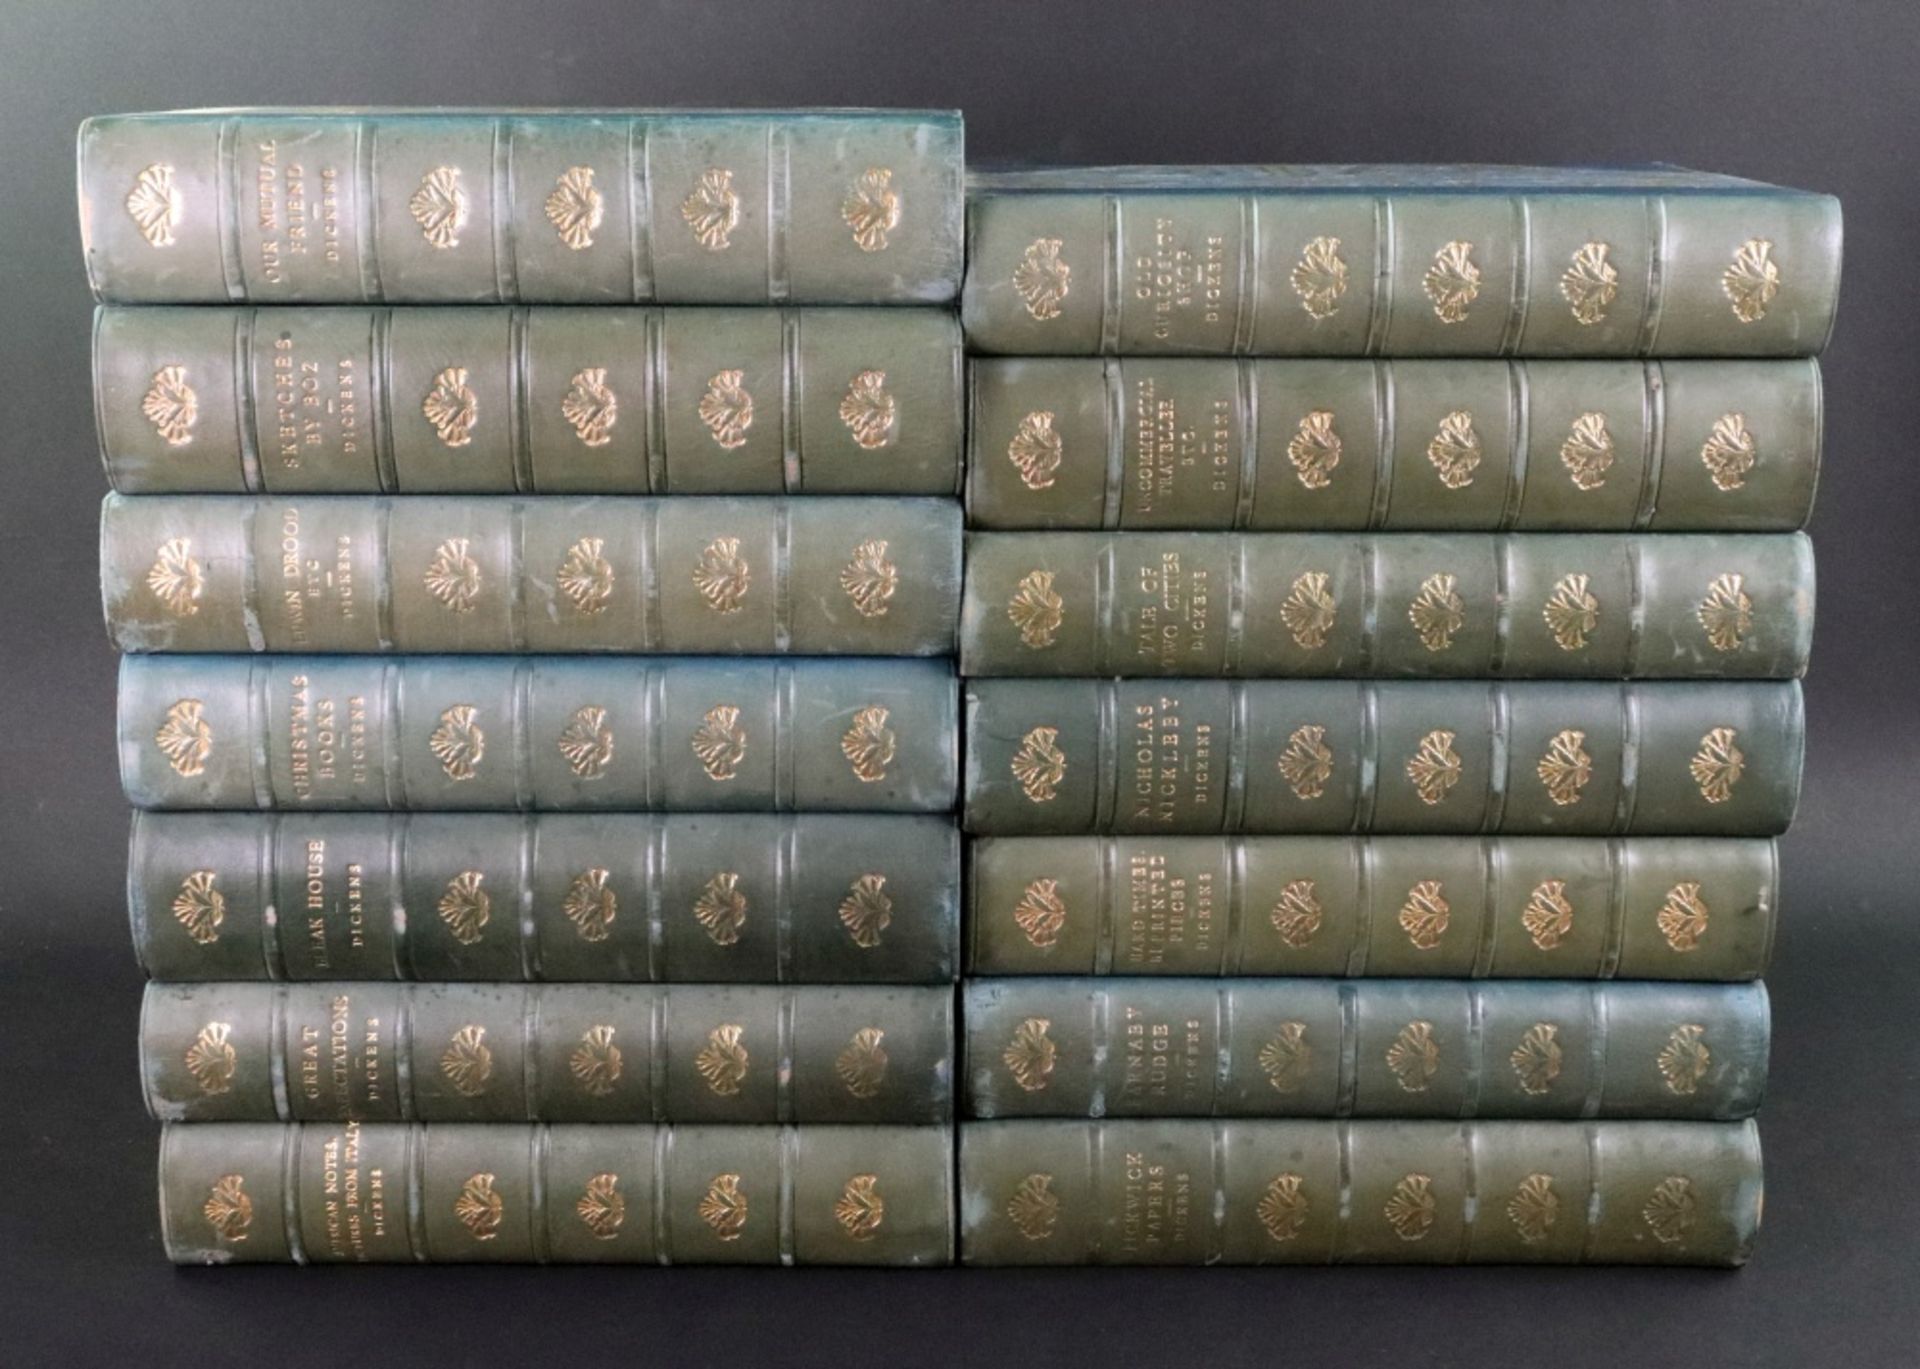 DICKENS (Charles) The Authentic edition, 14 vols.